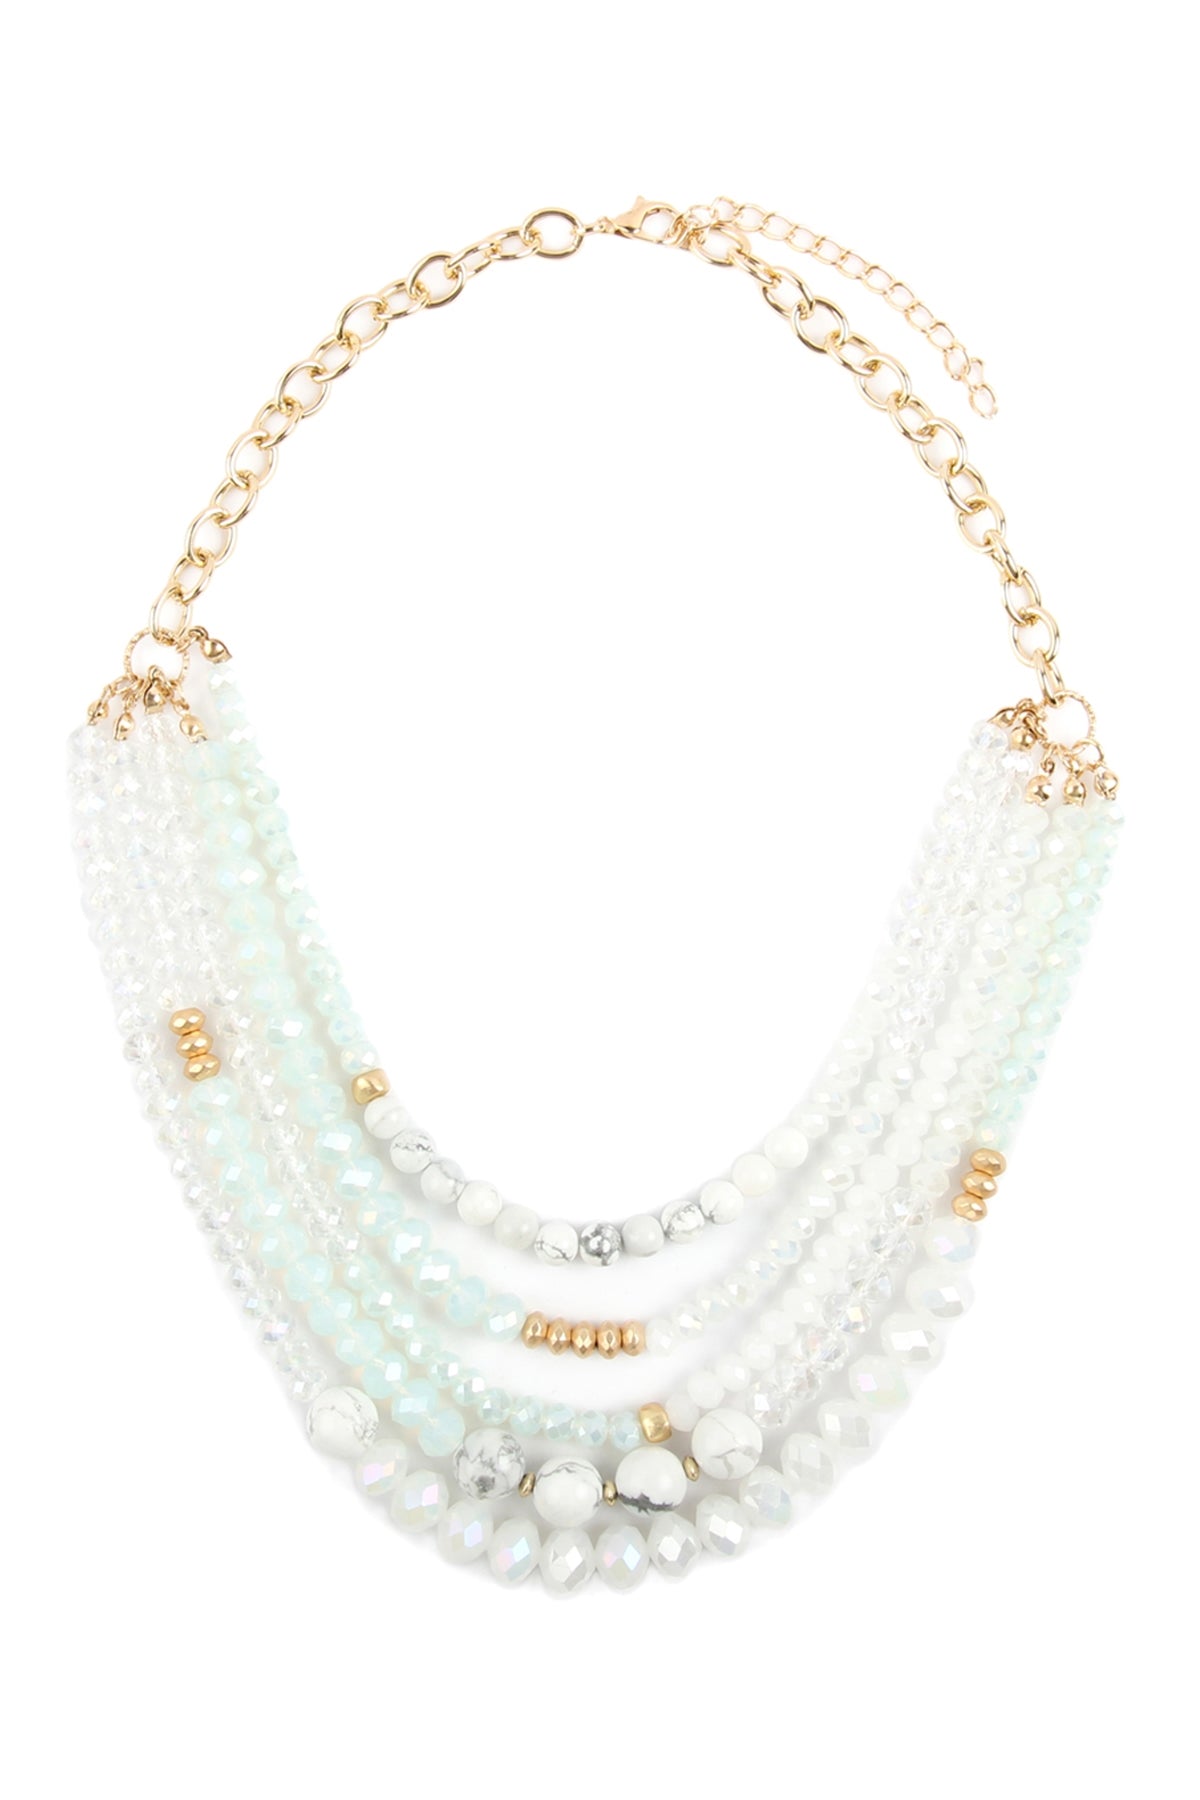 WHITE MIXED BEADS STATEMENT NECKLACE/6PCS (NOW $3.25 ONLY!)